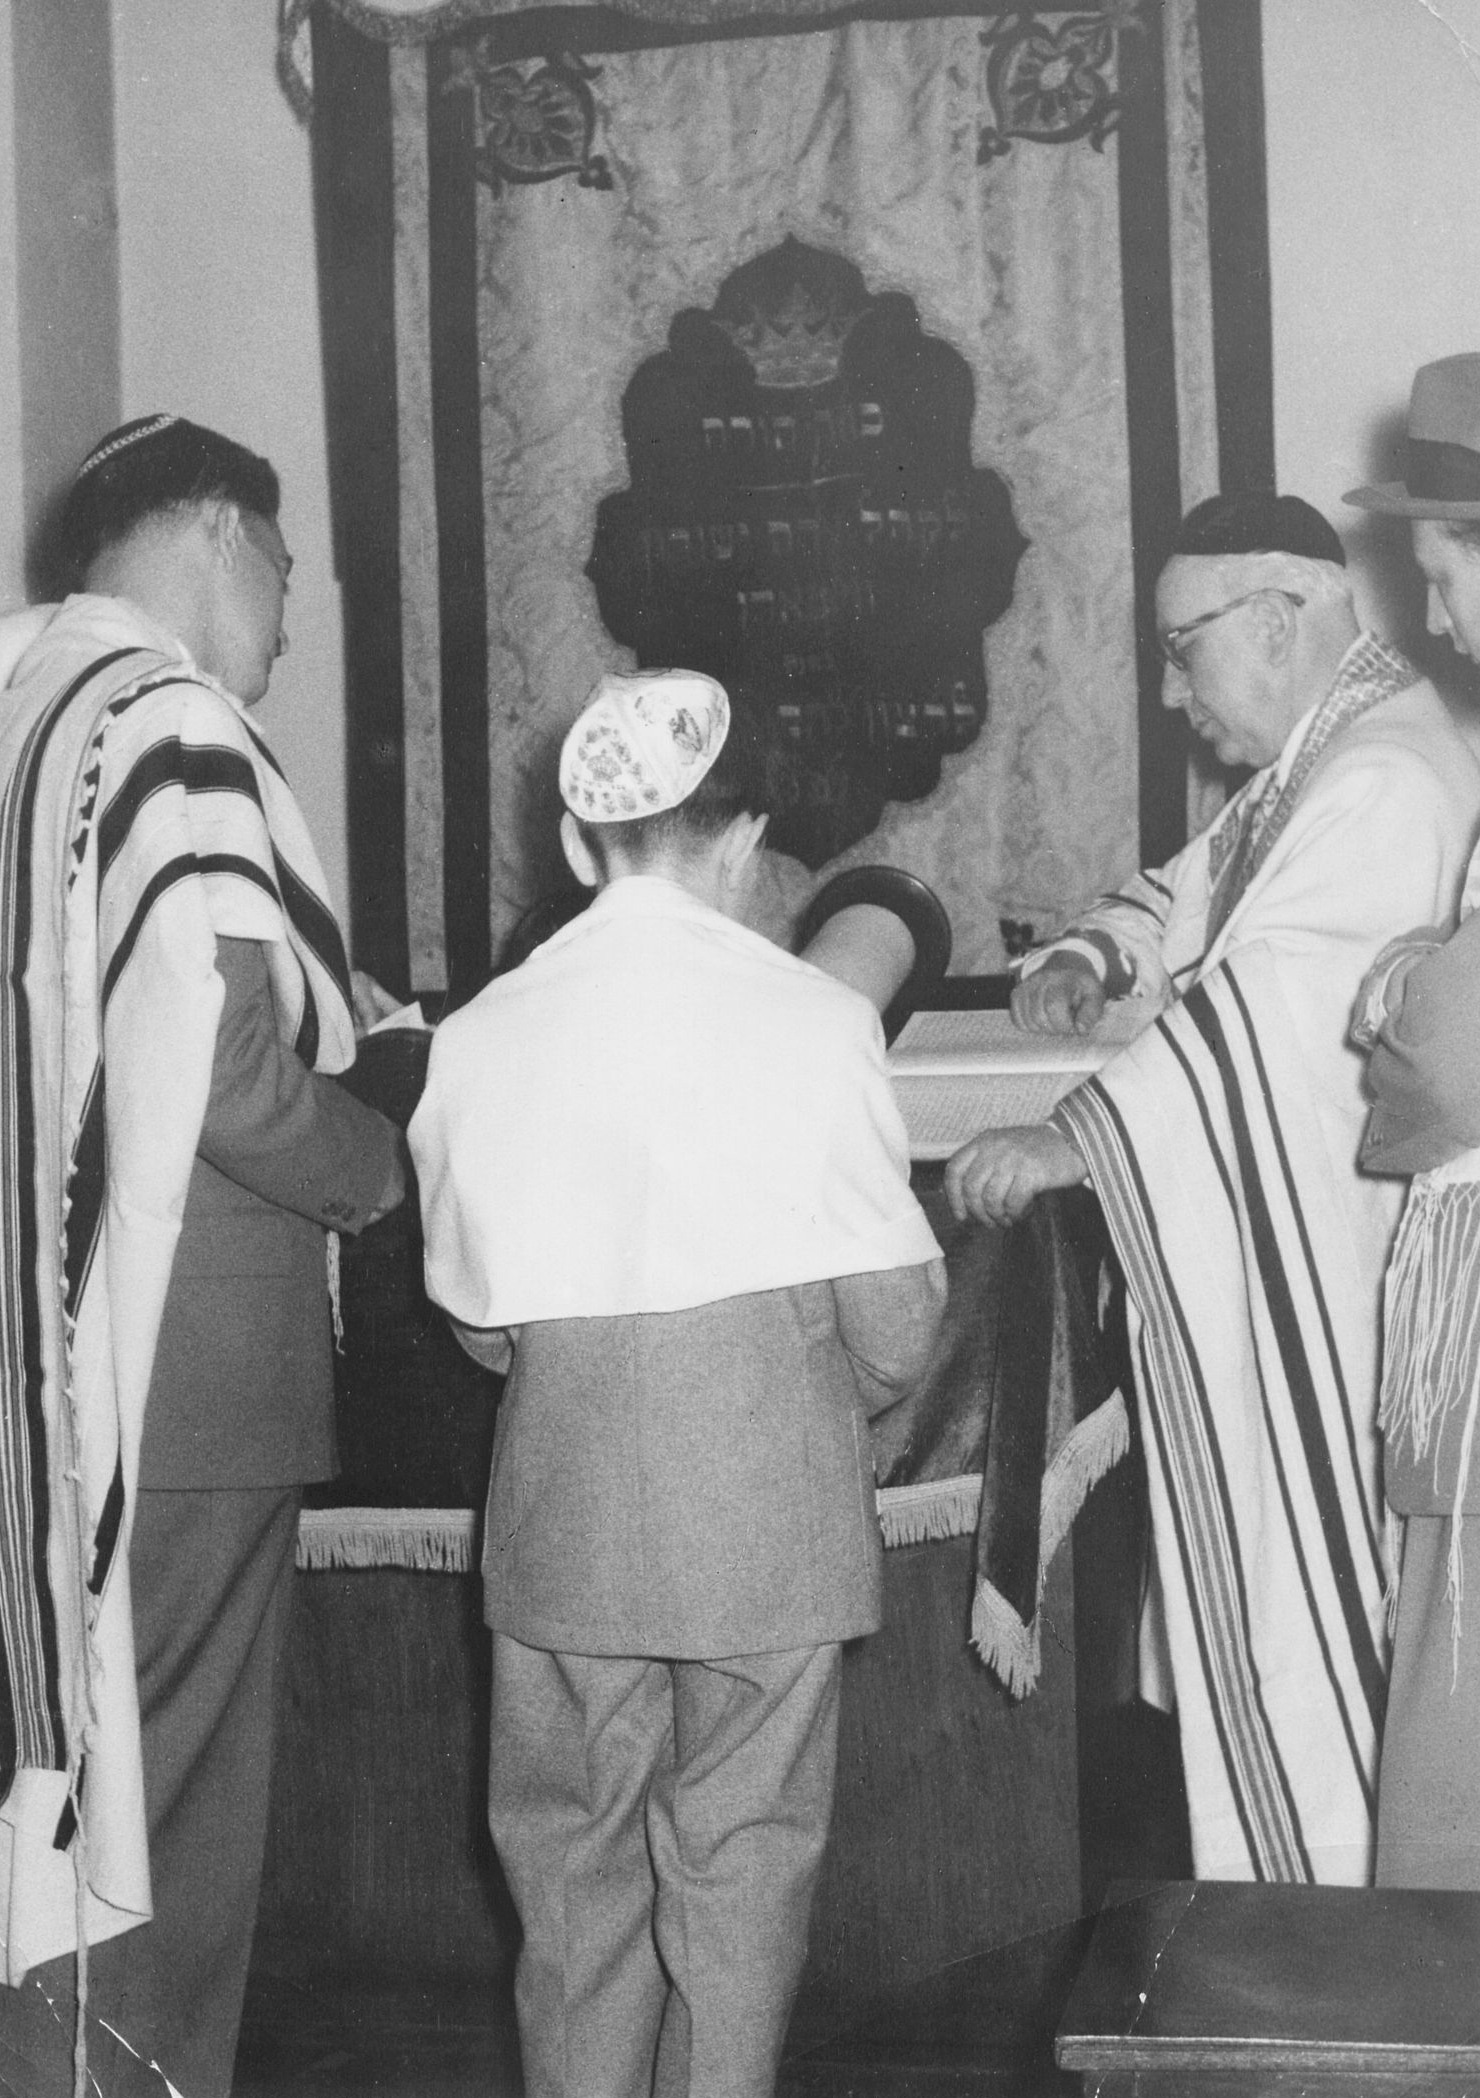 On the right: Naftali Rottenberg at the bar mitzvah by Rainer Zamojre. Collection Jewish Community Wiesbaden